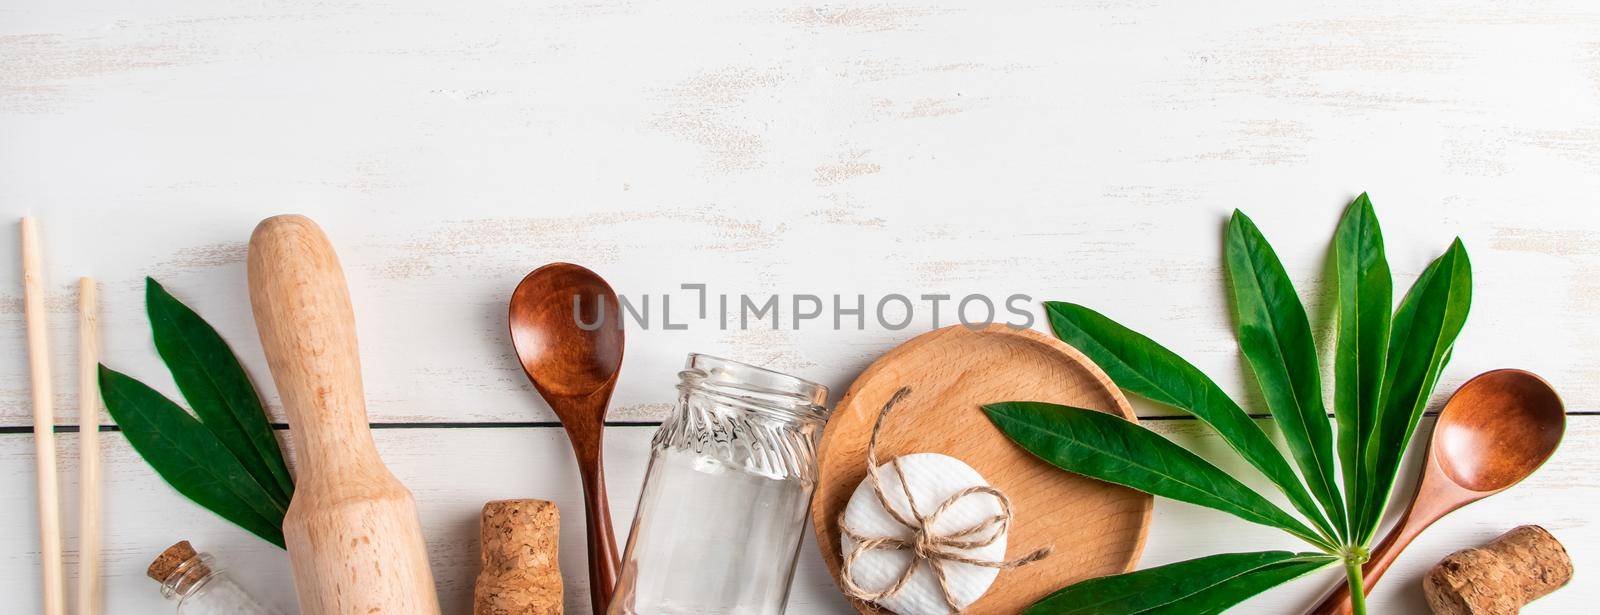 Eco-friendly recyclable products on white wooden background. Plastic-free kitchen accessories. by Statuska